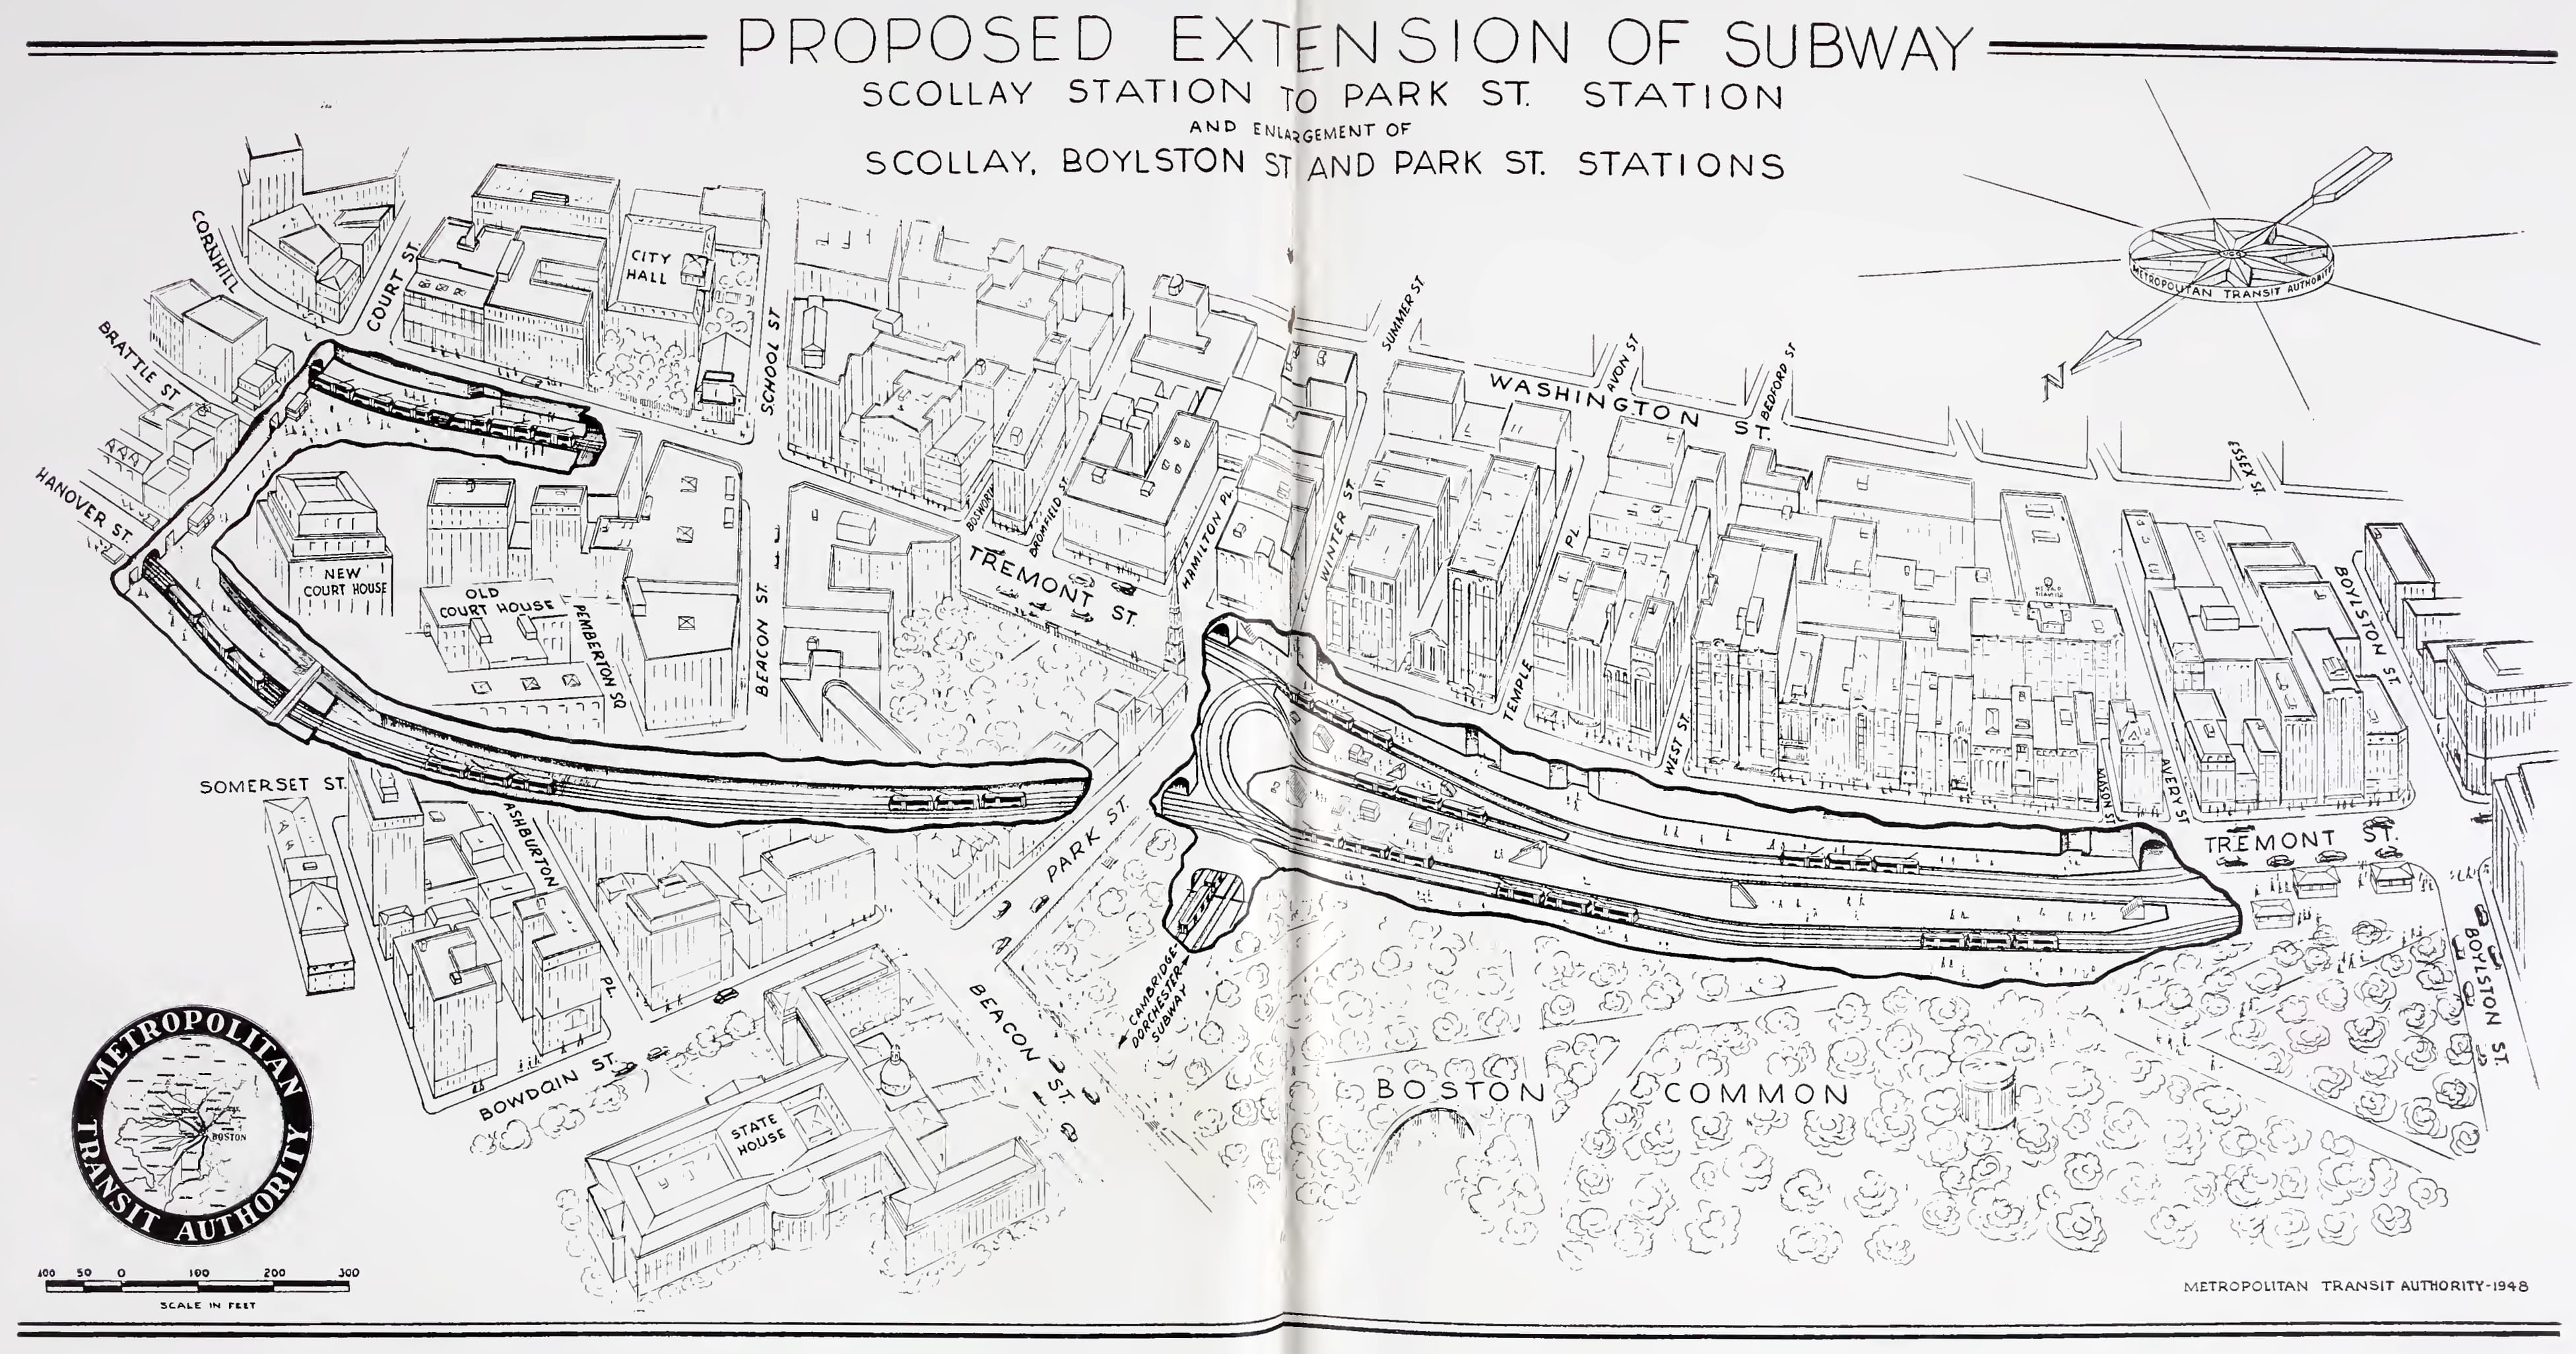 Image of “Proposed Extension of Subway: Scollay Station to Park St. Station and Enlargement of Scollay, Boylston St. and Park St. Stations” from “First Annual Report of the Board of Public Trustees of the MTA”